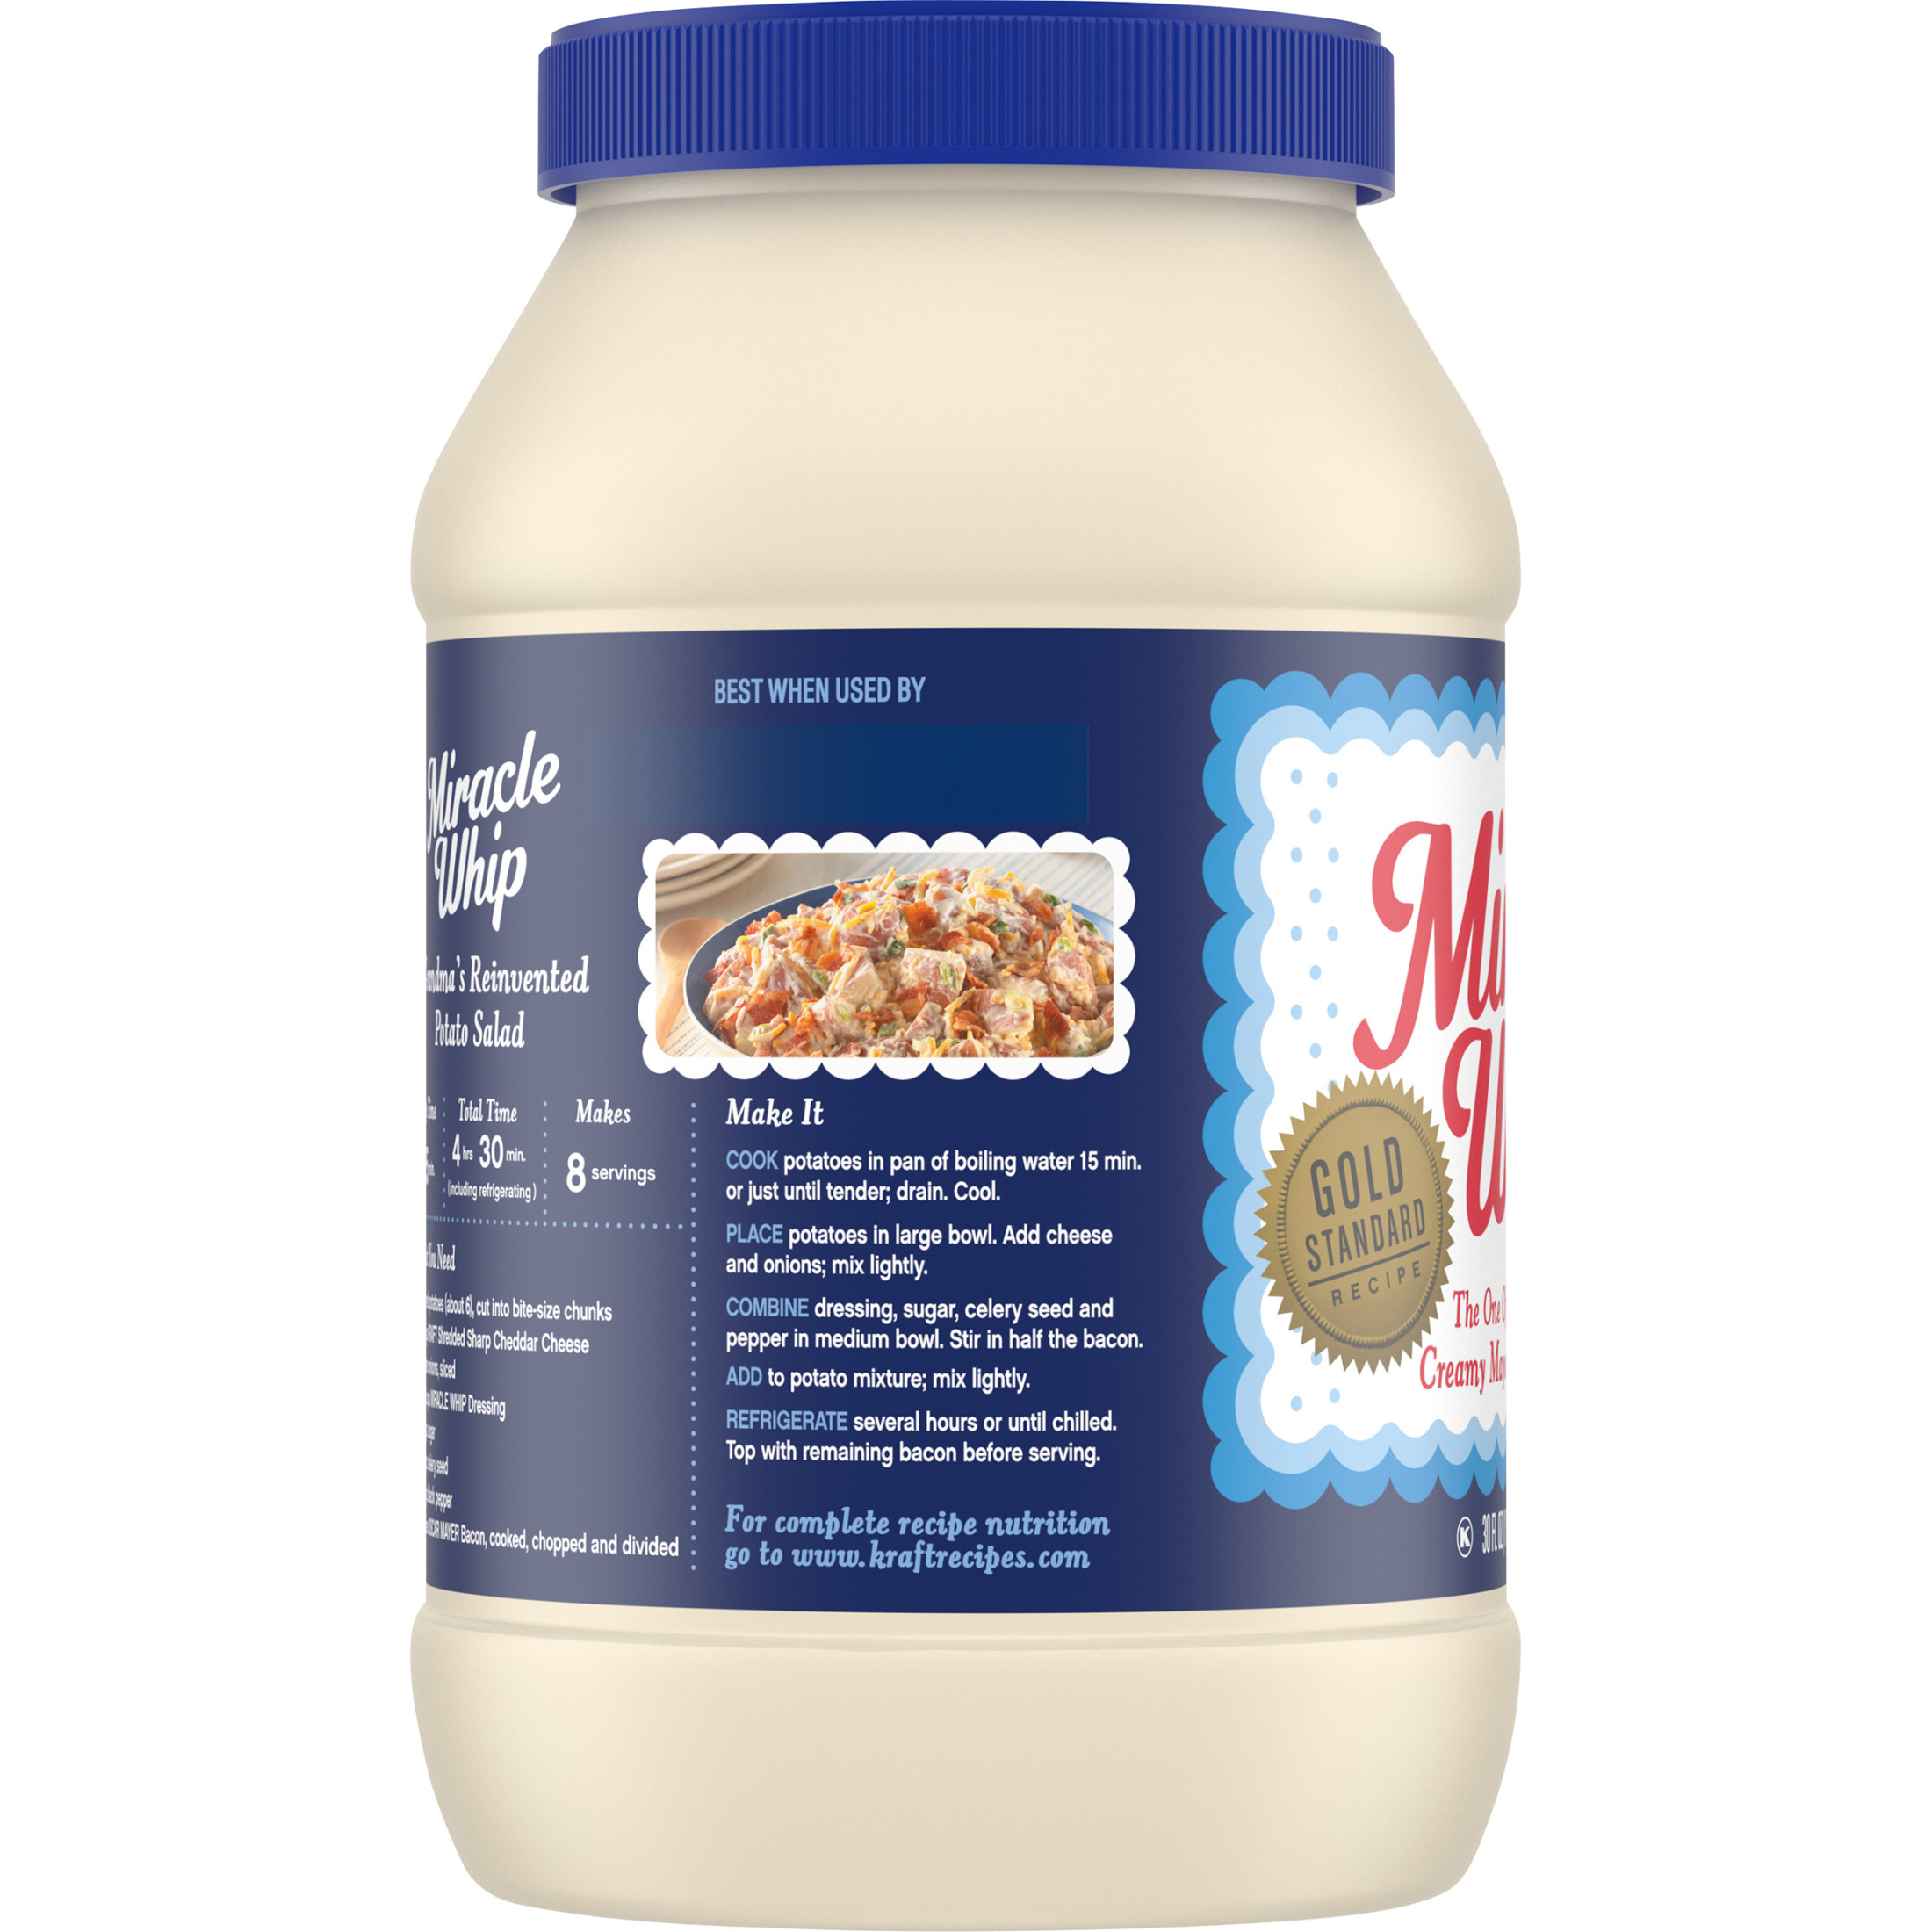 Miracle Whip Mayo-like Dressing, for a Keto and Low Carb Lifestyle, 30 fl oz Jar - image 16 of 16